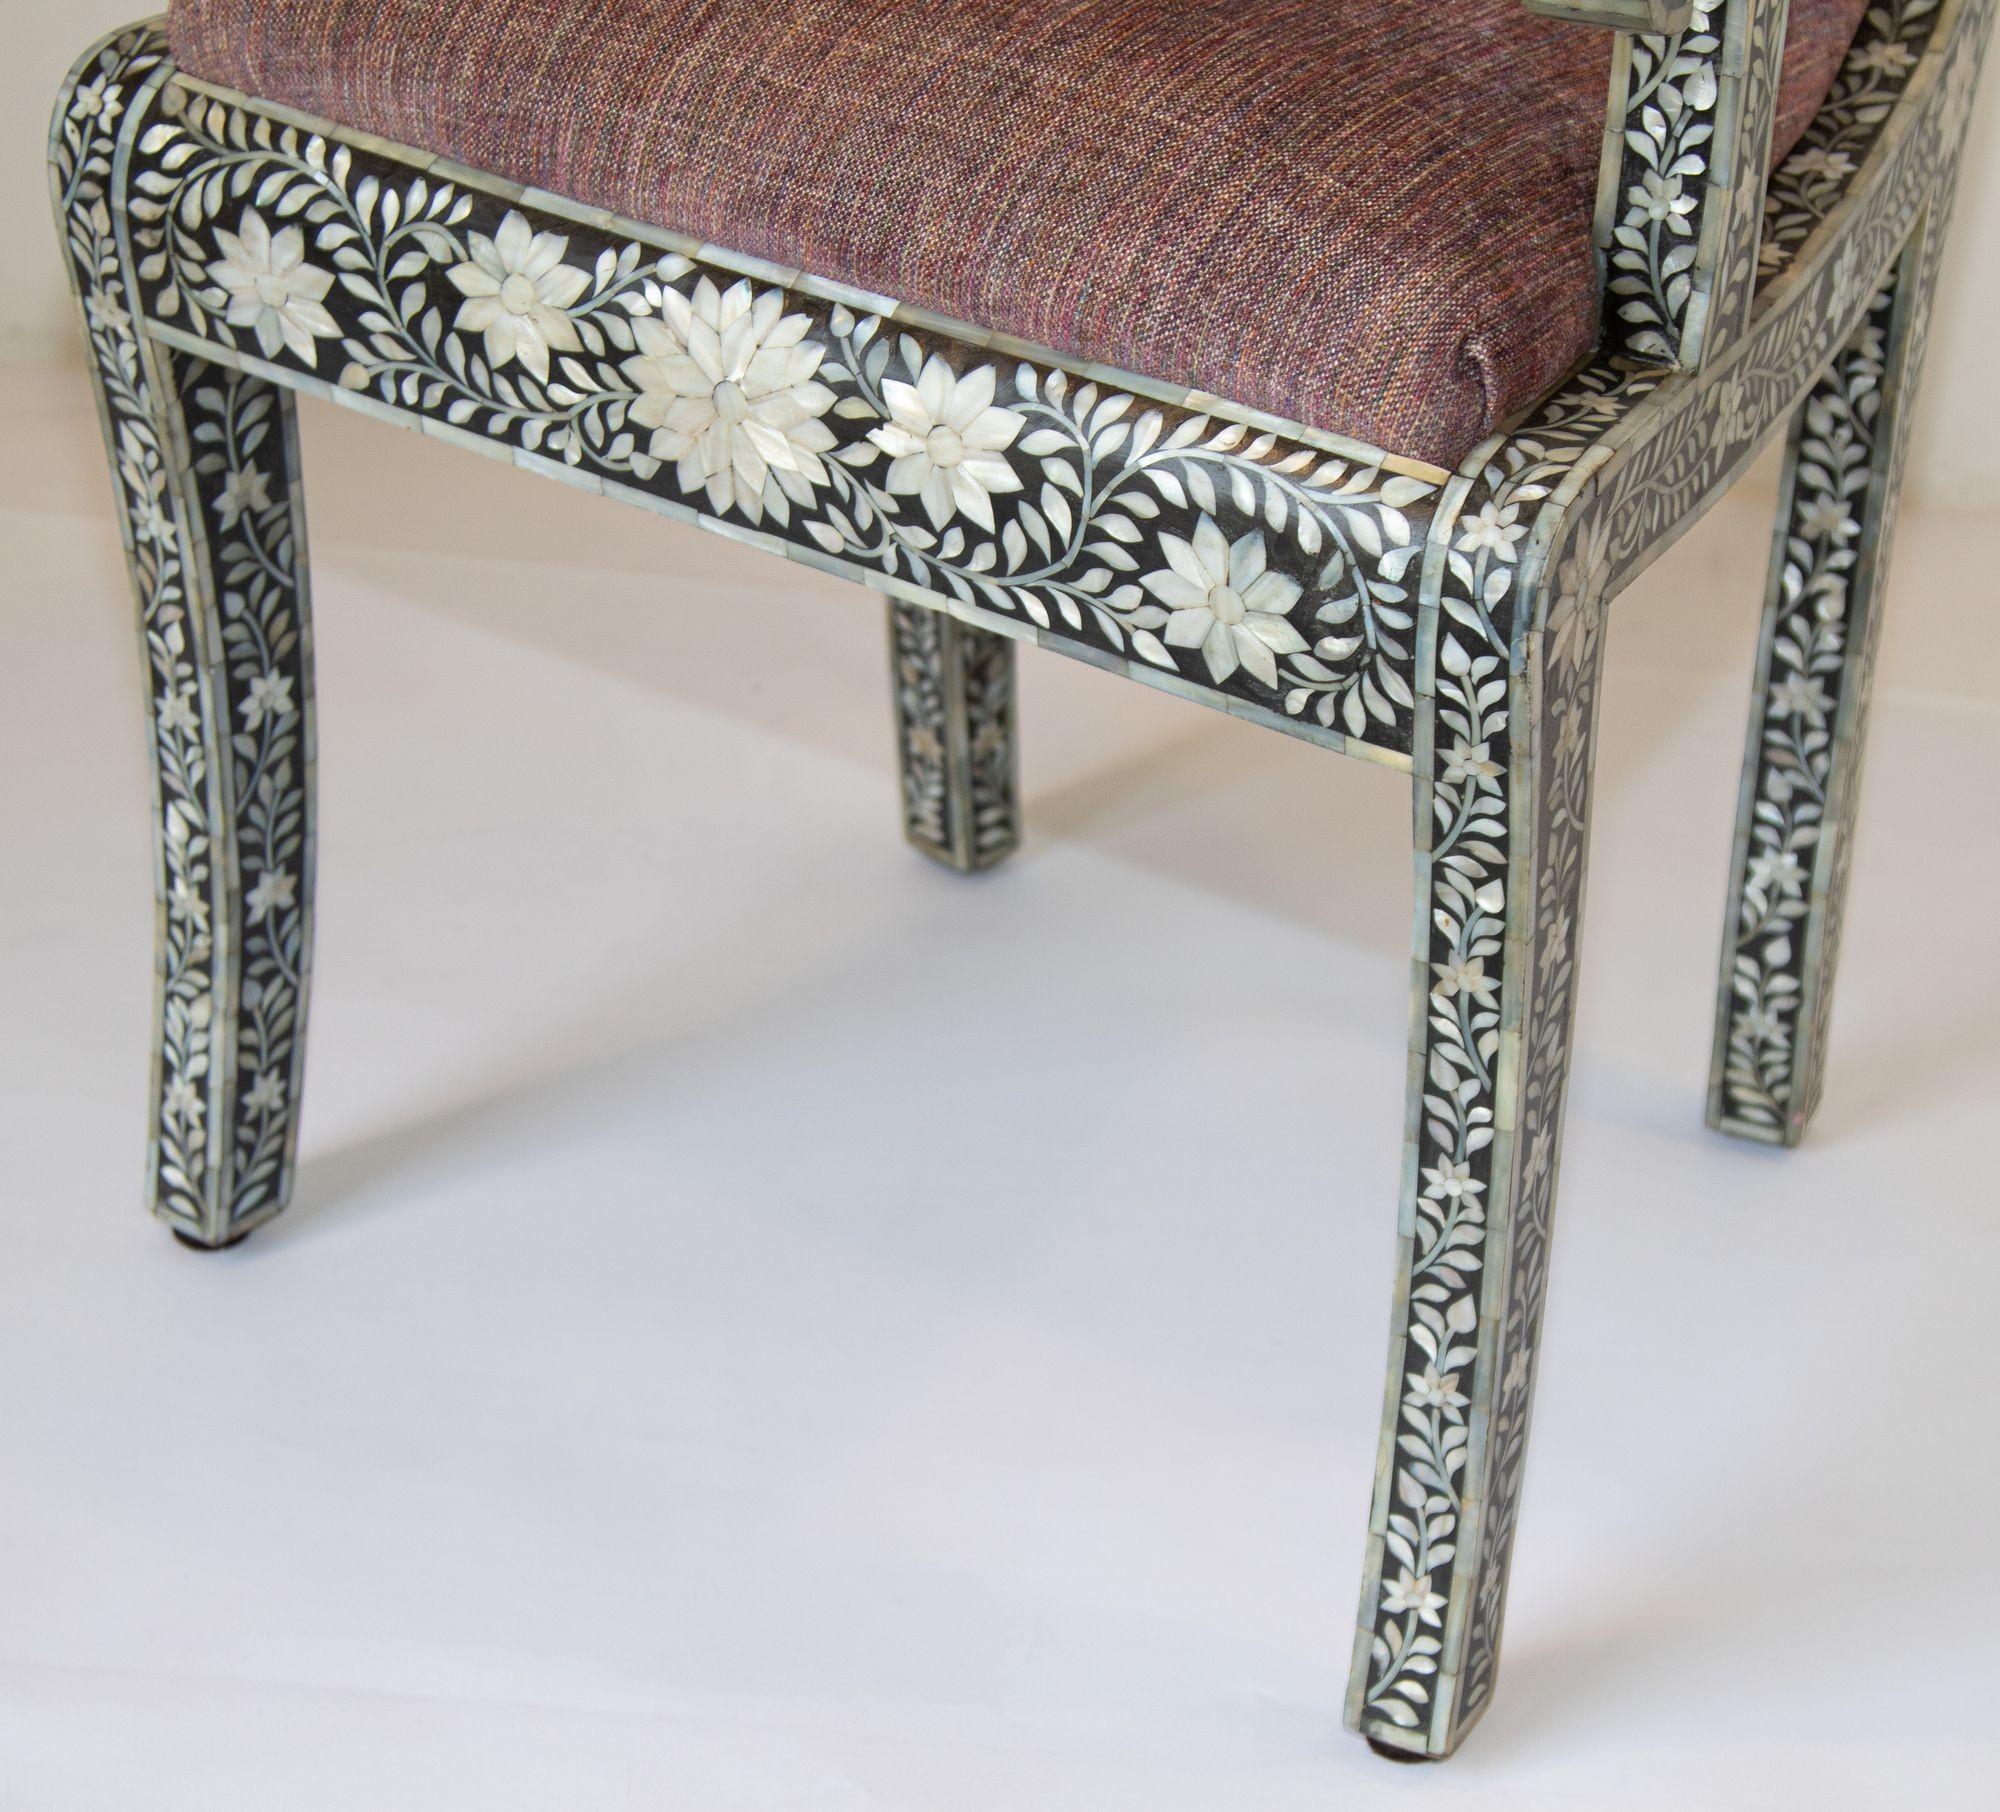 Anglo-Indian Mughal Mother of Pearl Inlaid Klismos Armchair with Ram Head 1 of 2 For Sale 11